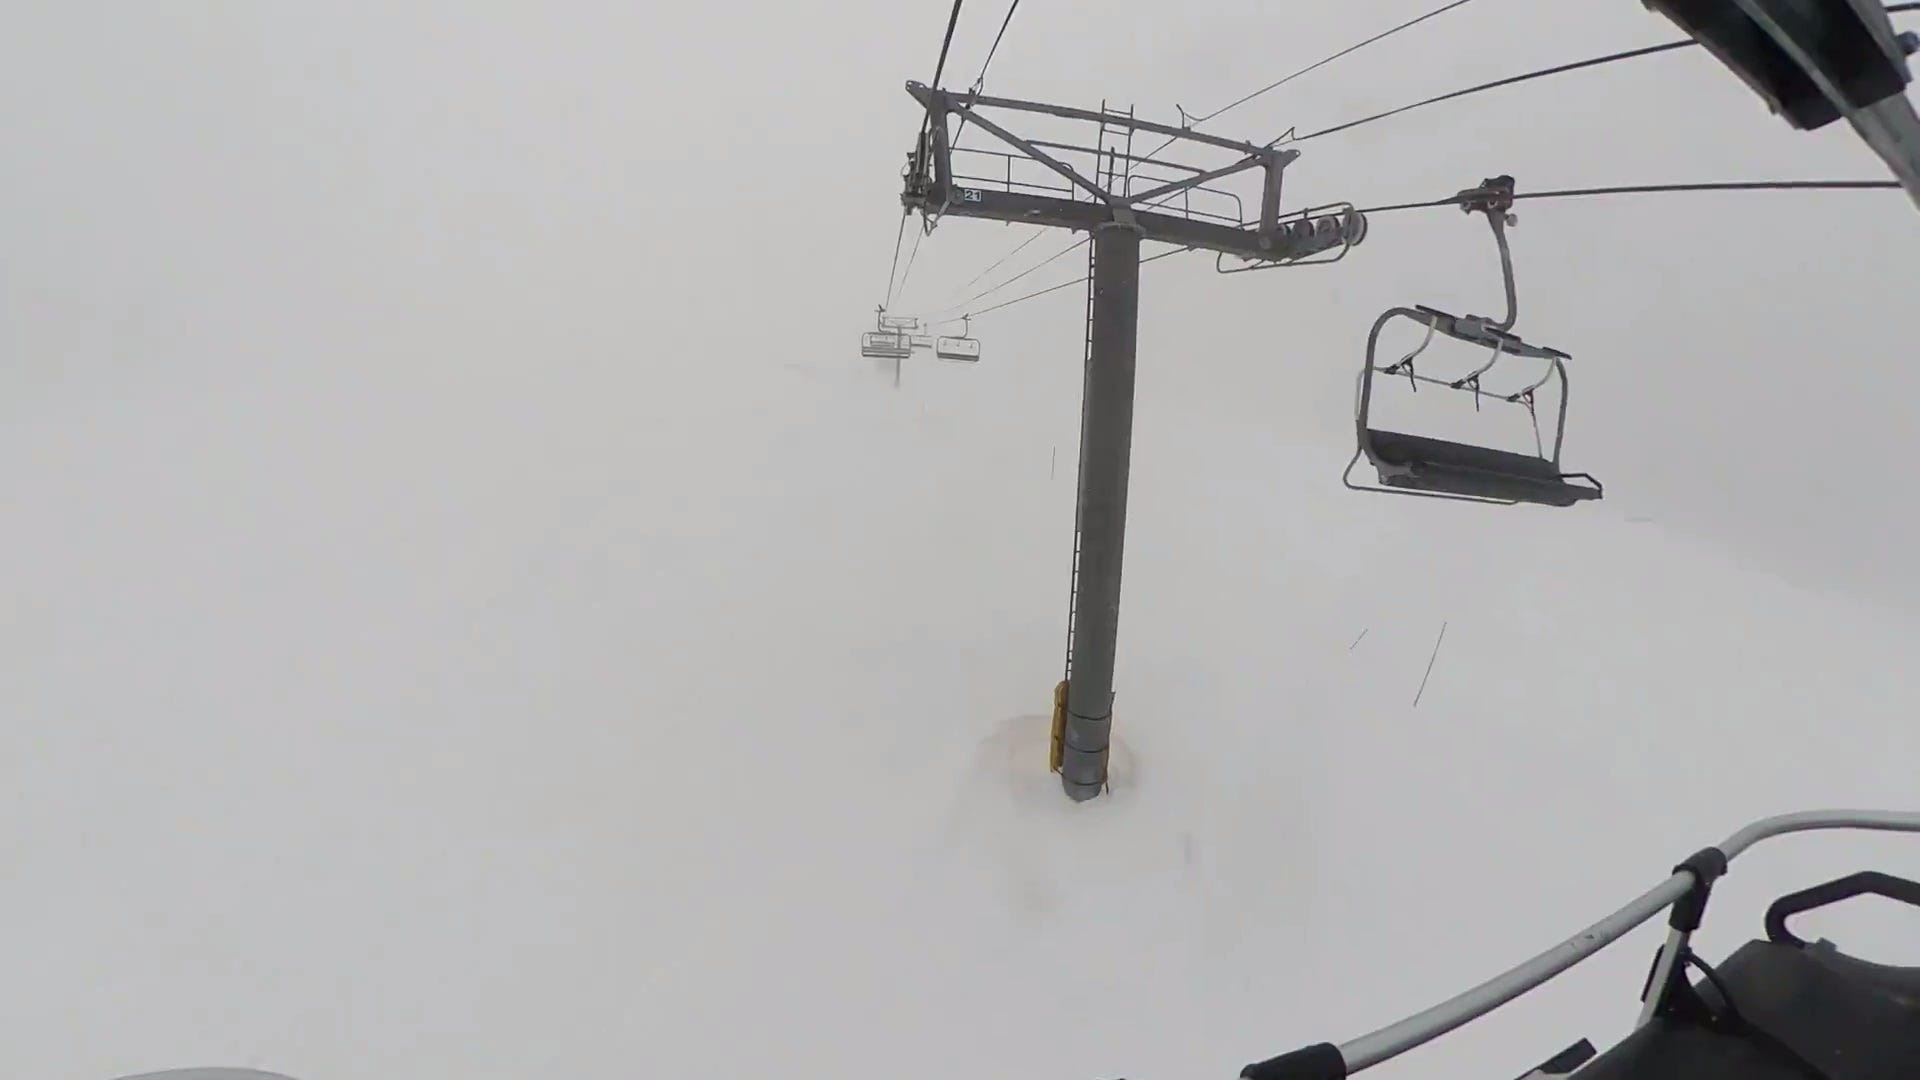 a ski lift tower and a few chairs are visible. Whiteout conditions make it hard to tell the ground apart from the sky